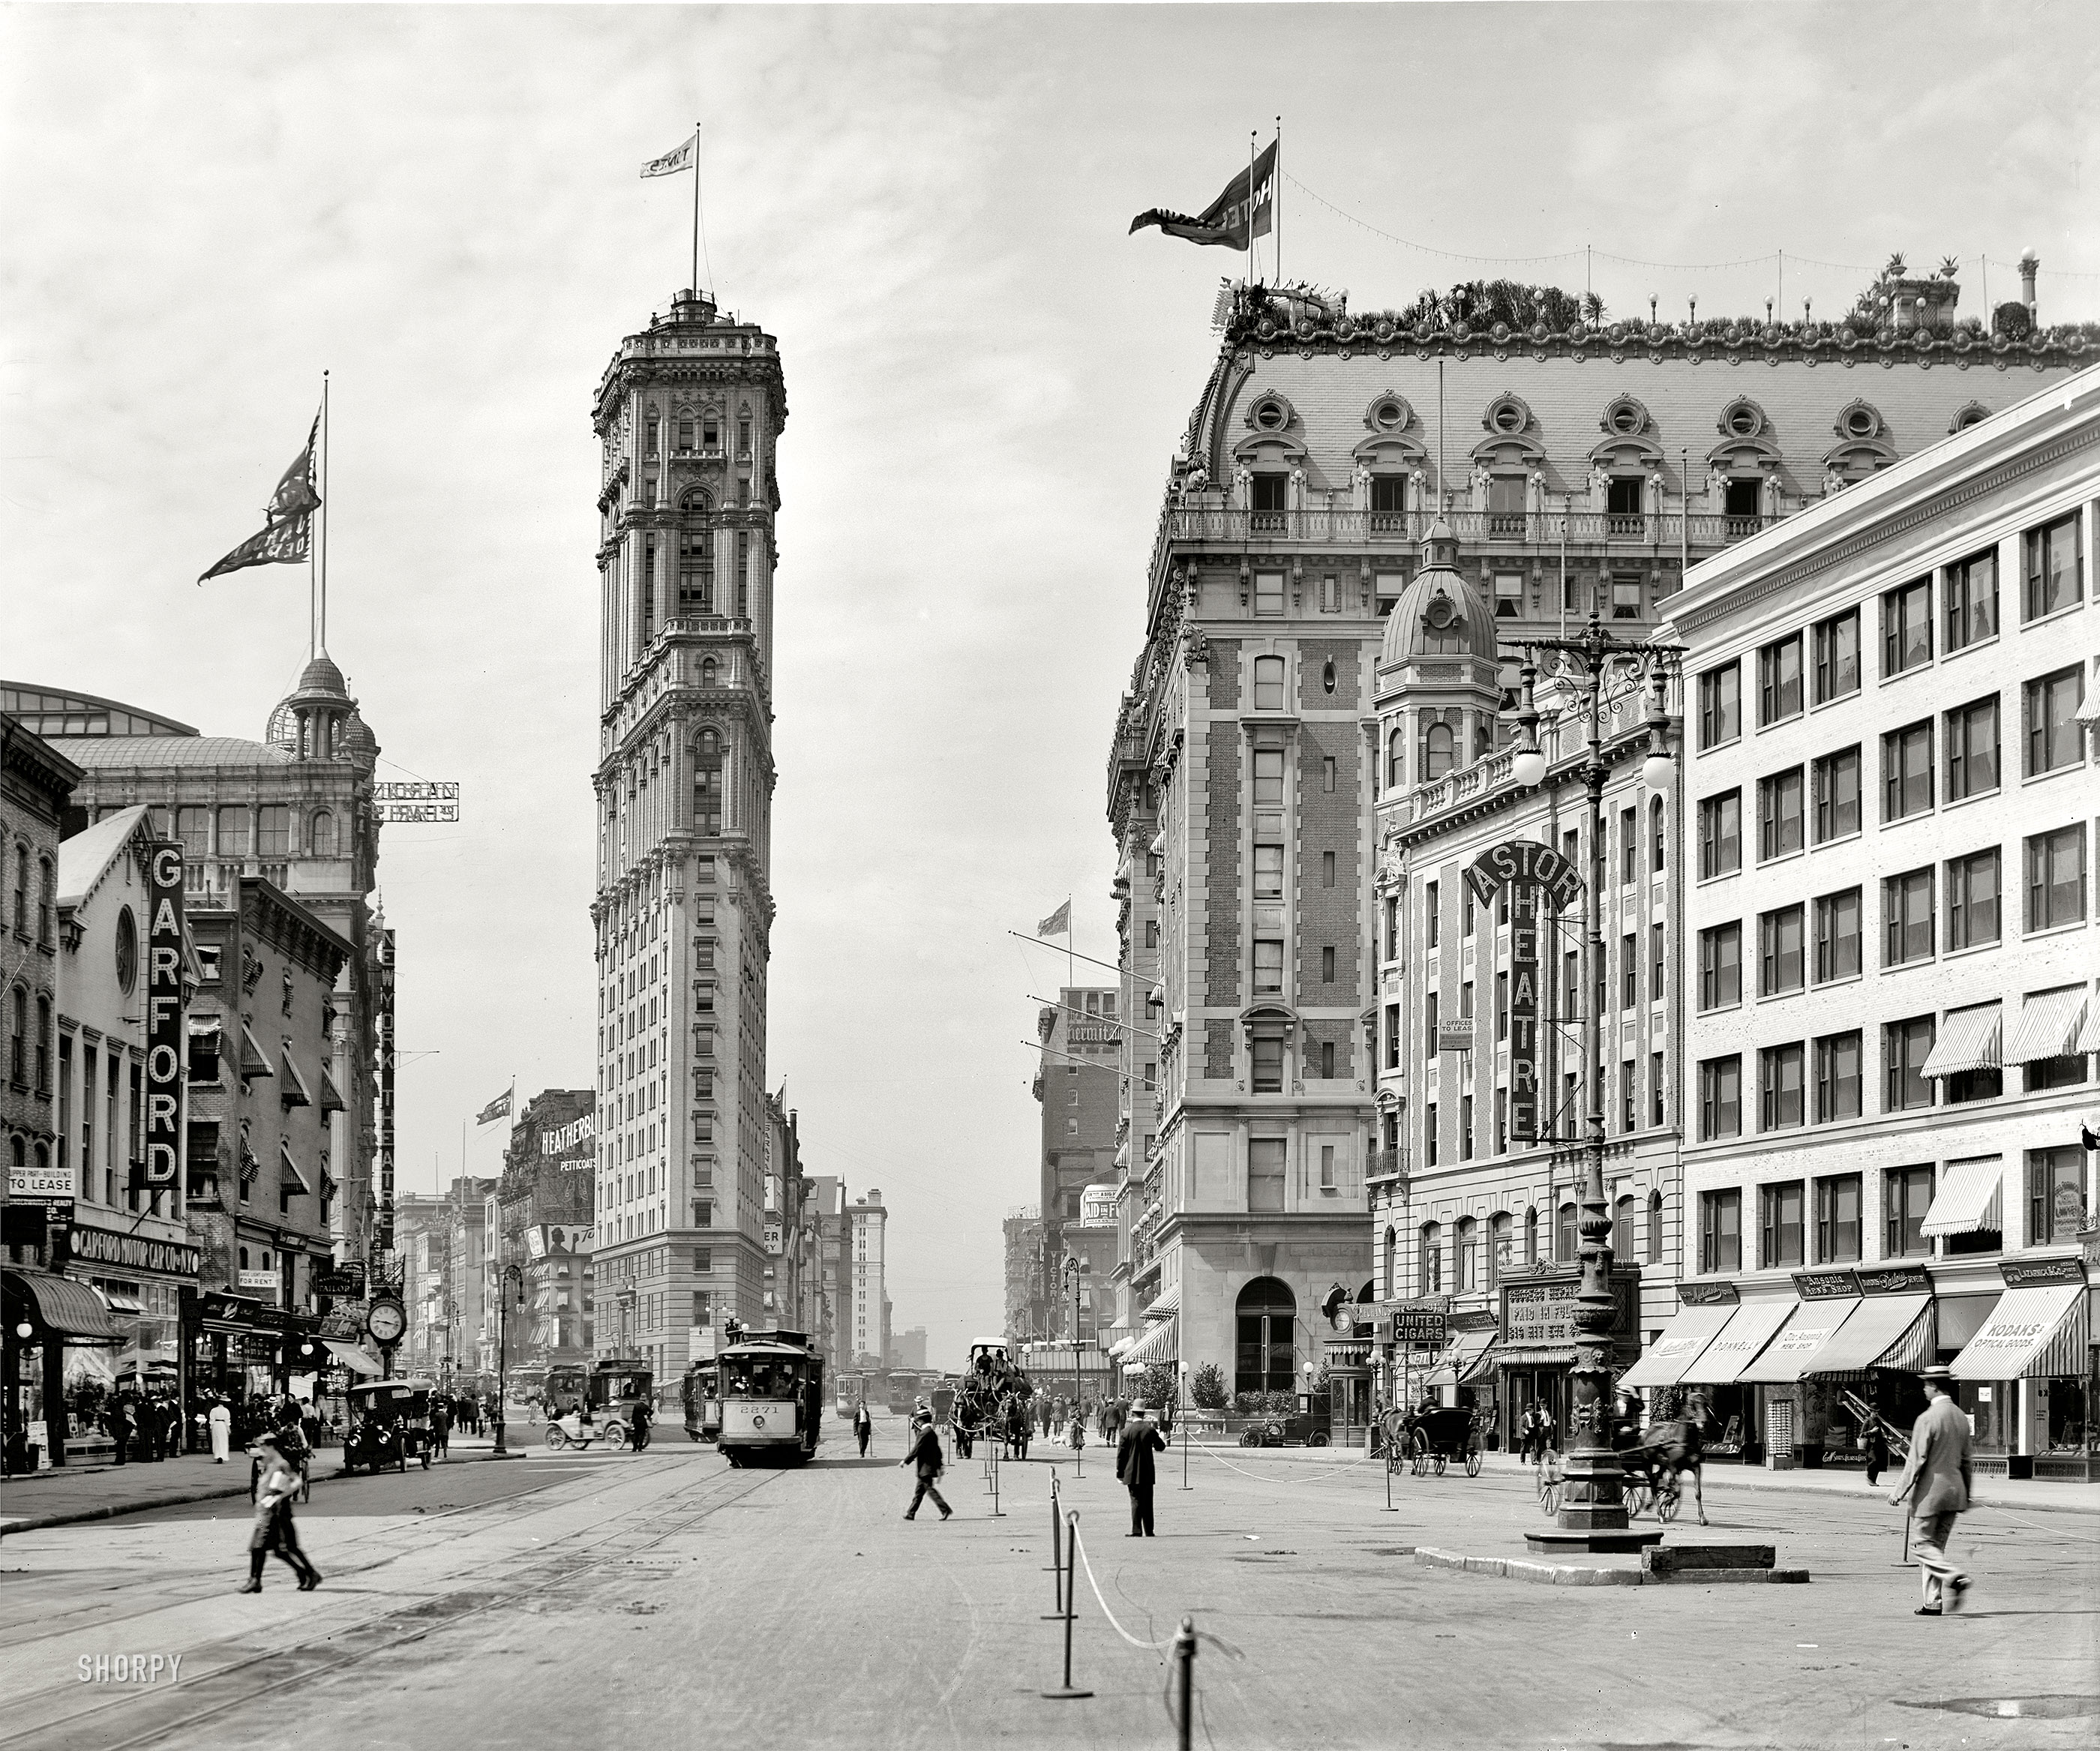 New York circa 1908. "Times Square." The old New York Times building, now encased in billboards, Hotel Astor and various theaters seen from Broadway. 8x10 inch dry plate glass negative, Detroit Publishing Company. View full size.